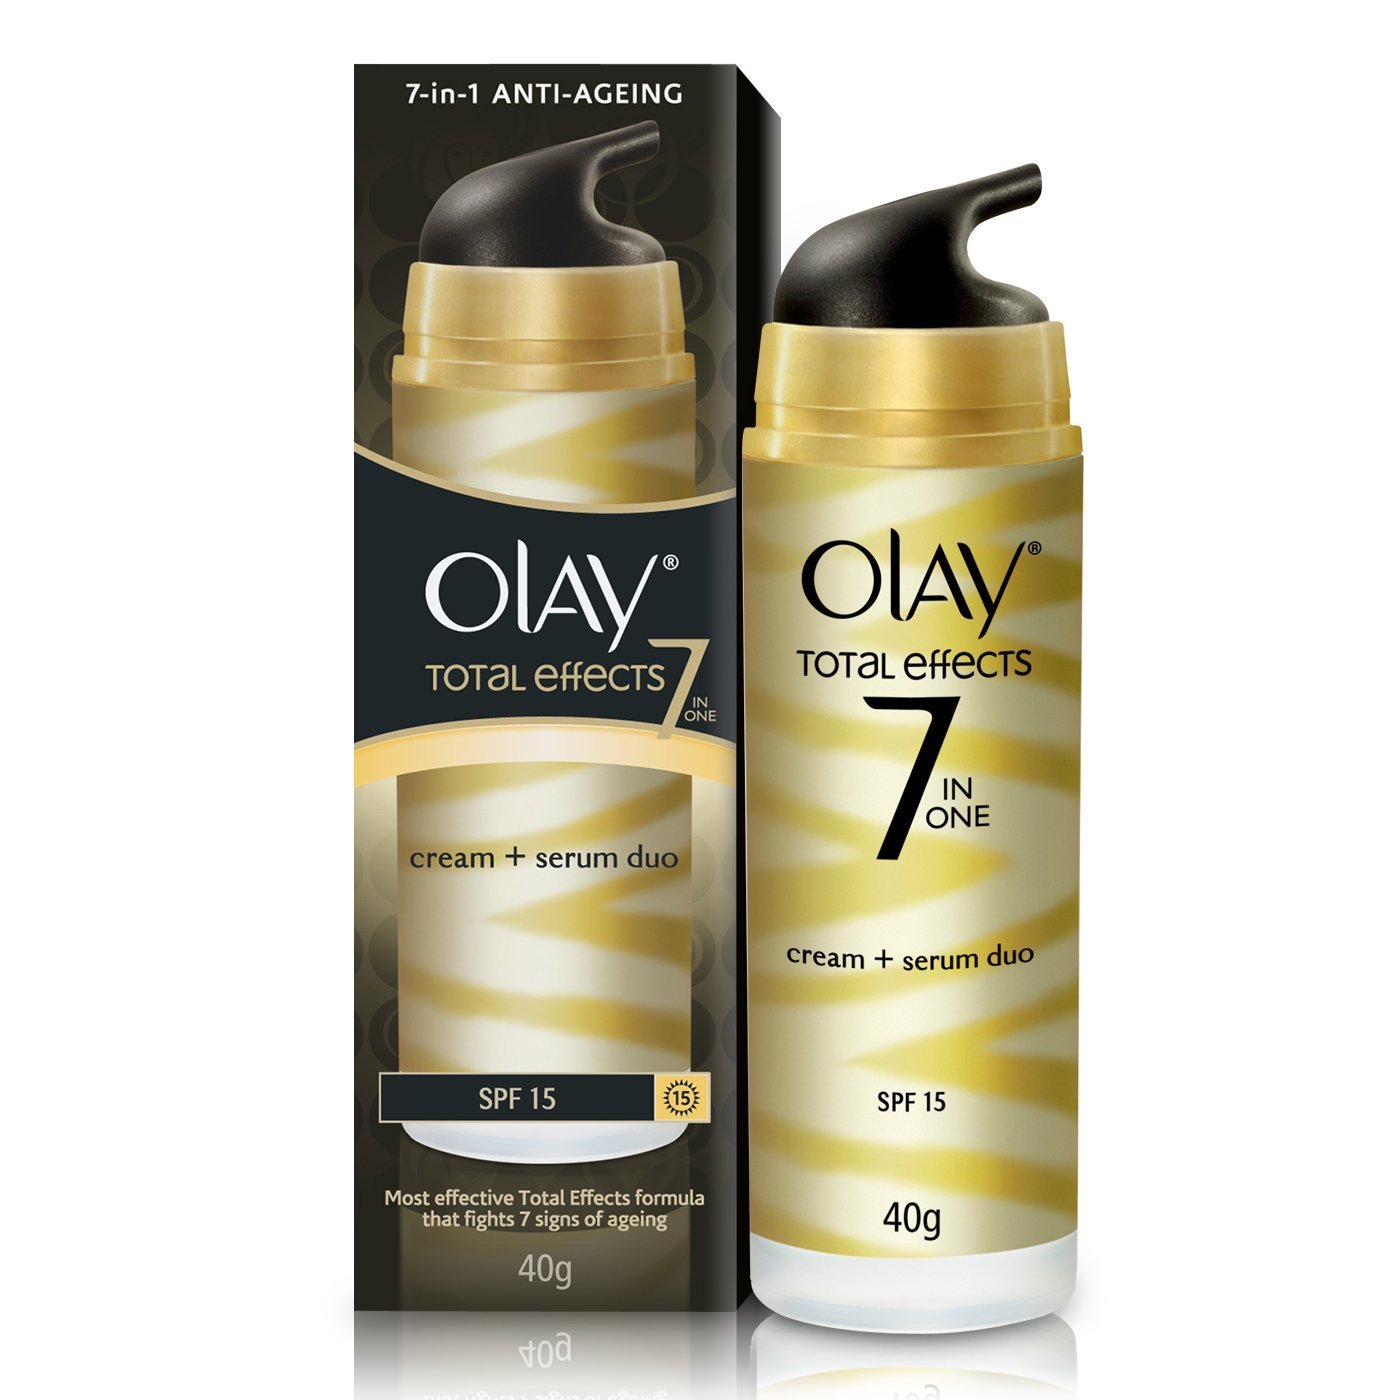 Olay Total Effects 7-In-1 Anti-Ageing Cream + Serum Duo 